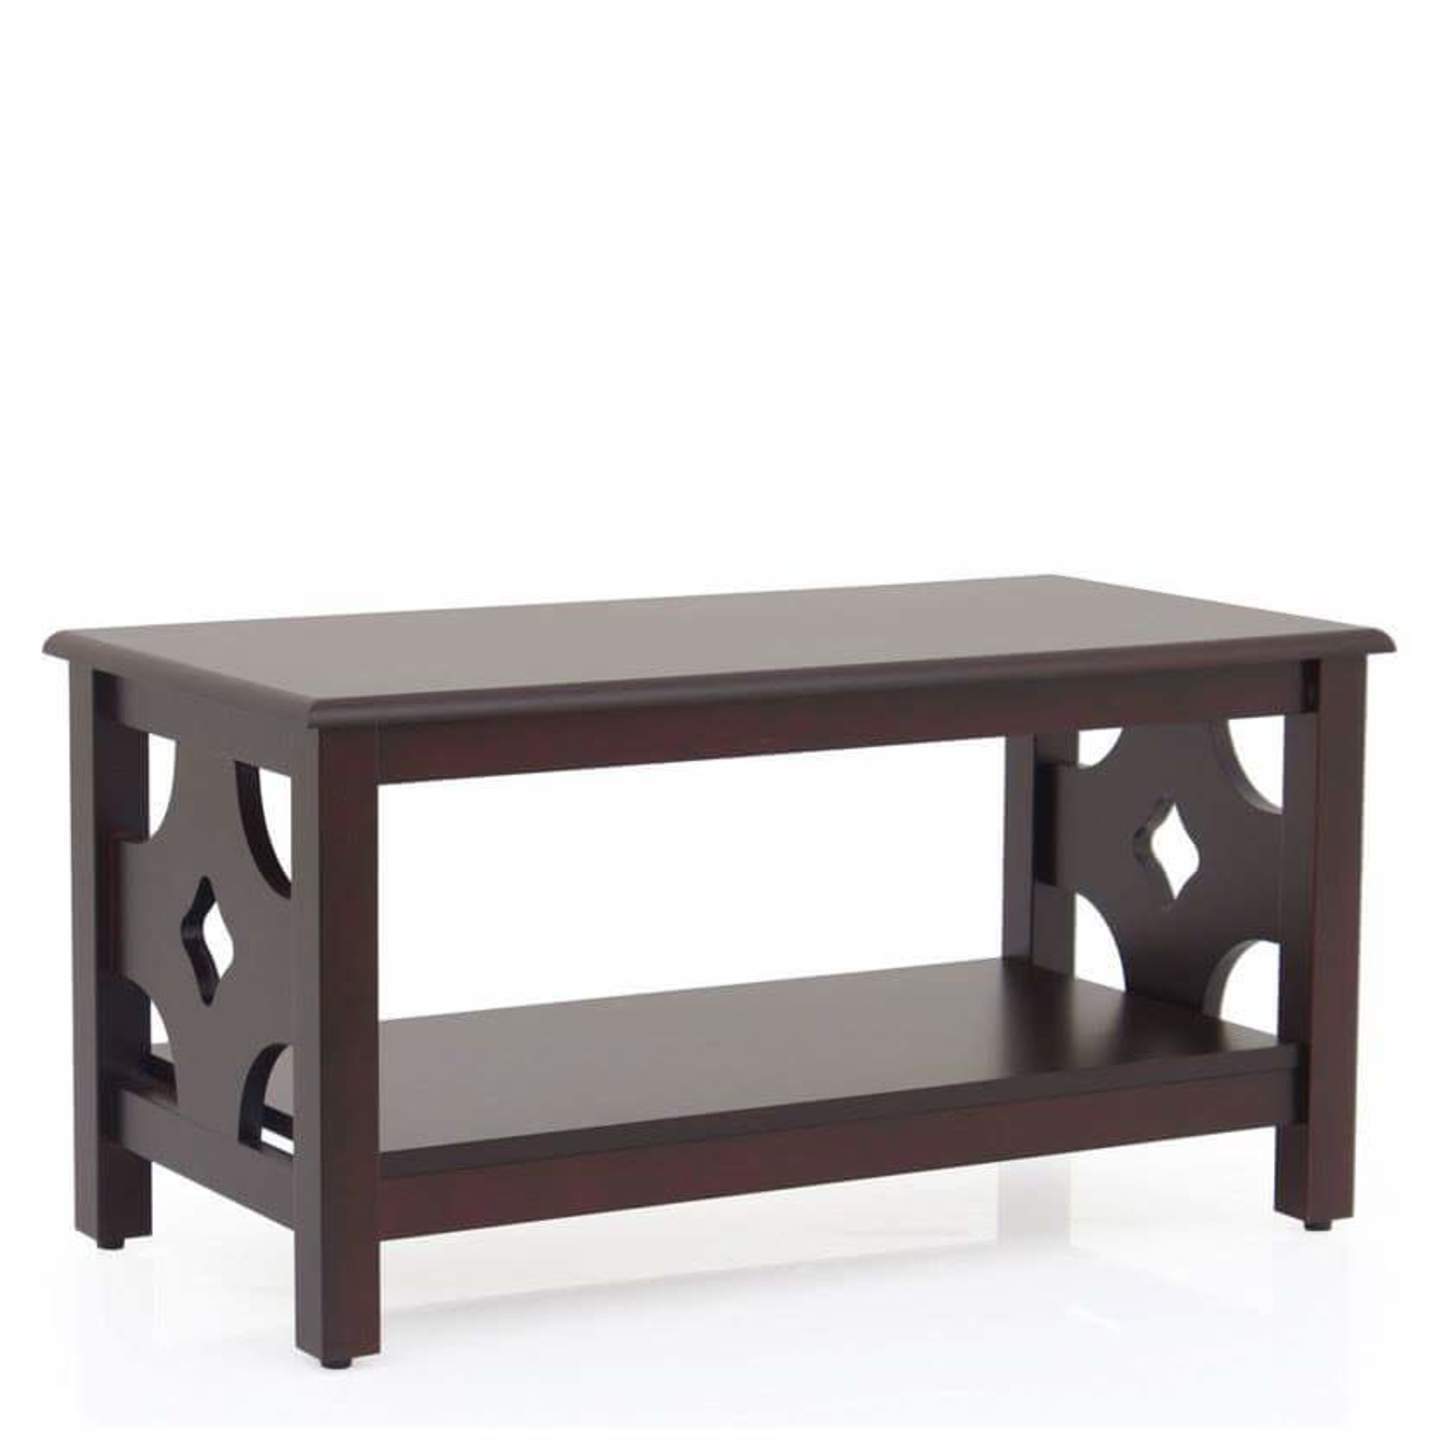 DW Center Table C-013 In Brown Colour